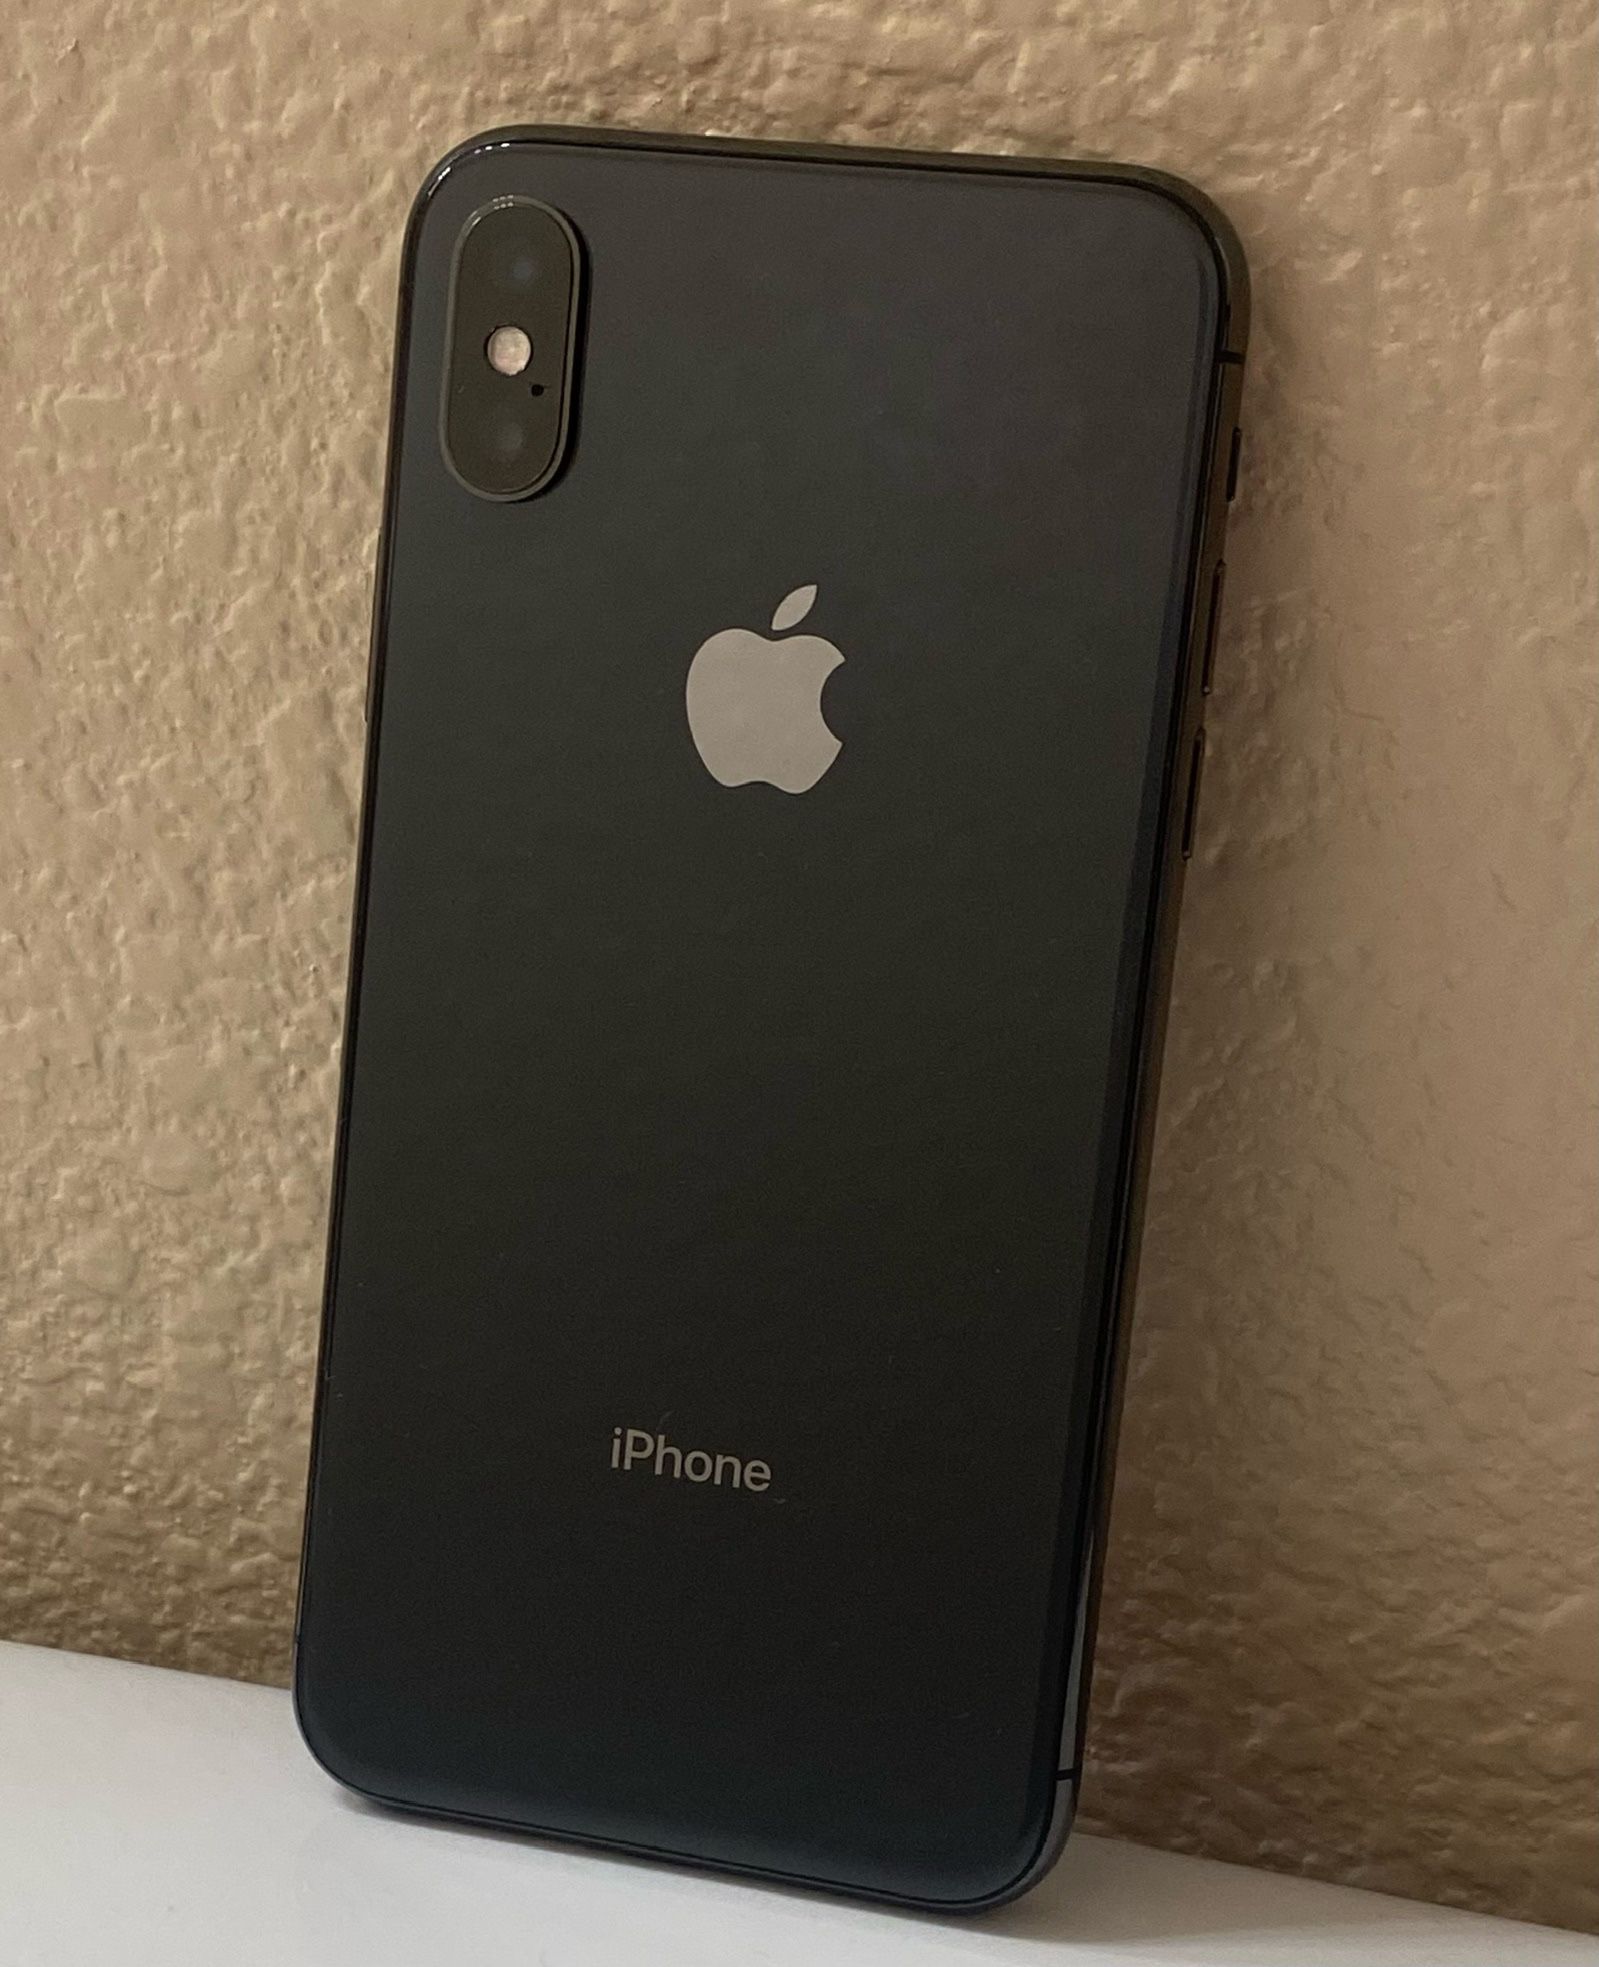 iPhone X - Trades For Apple Products Are Welcome 